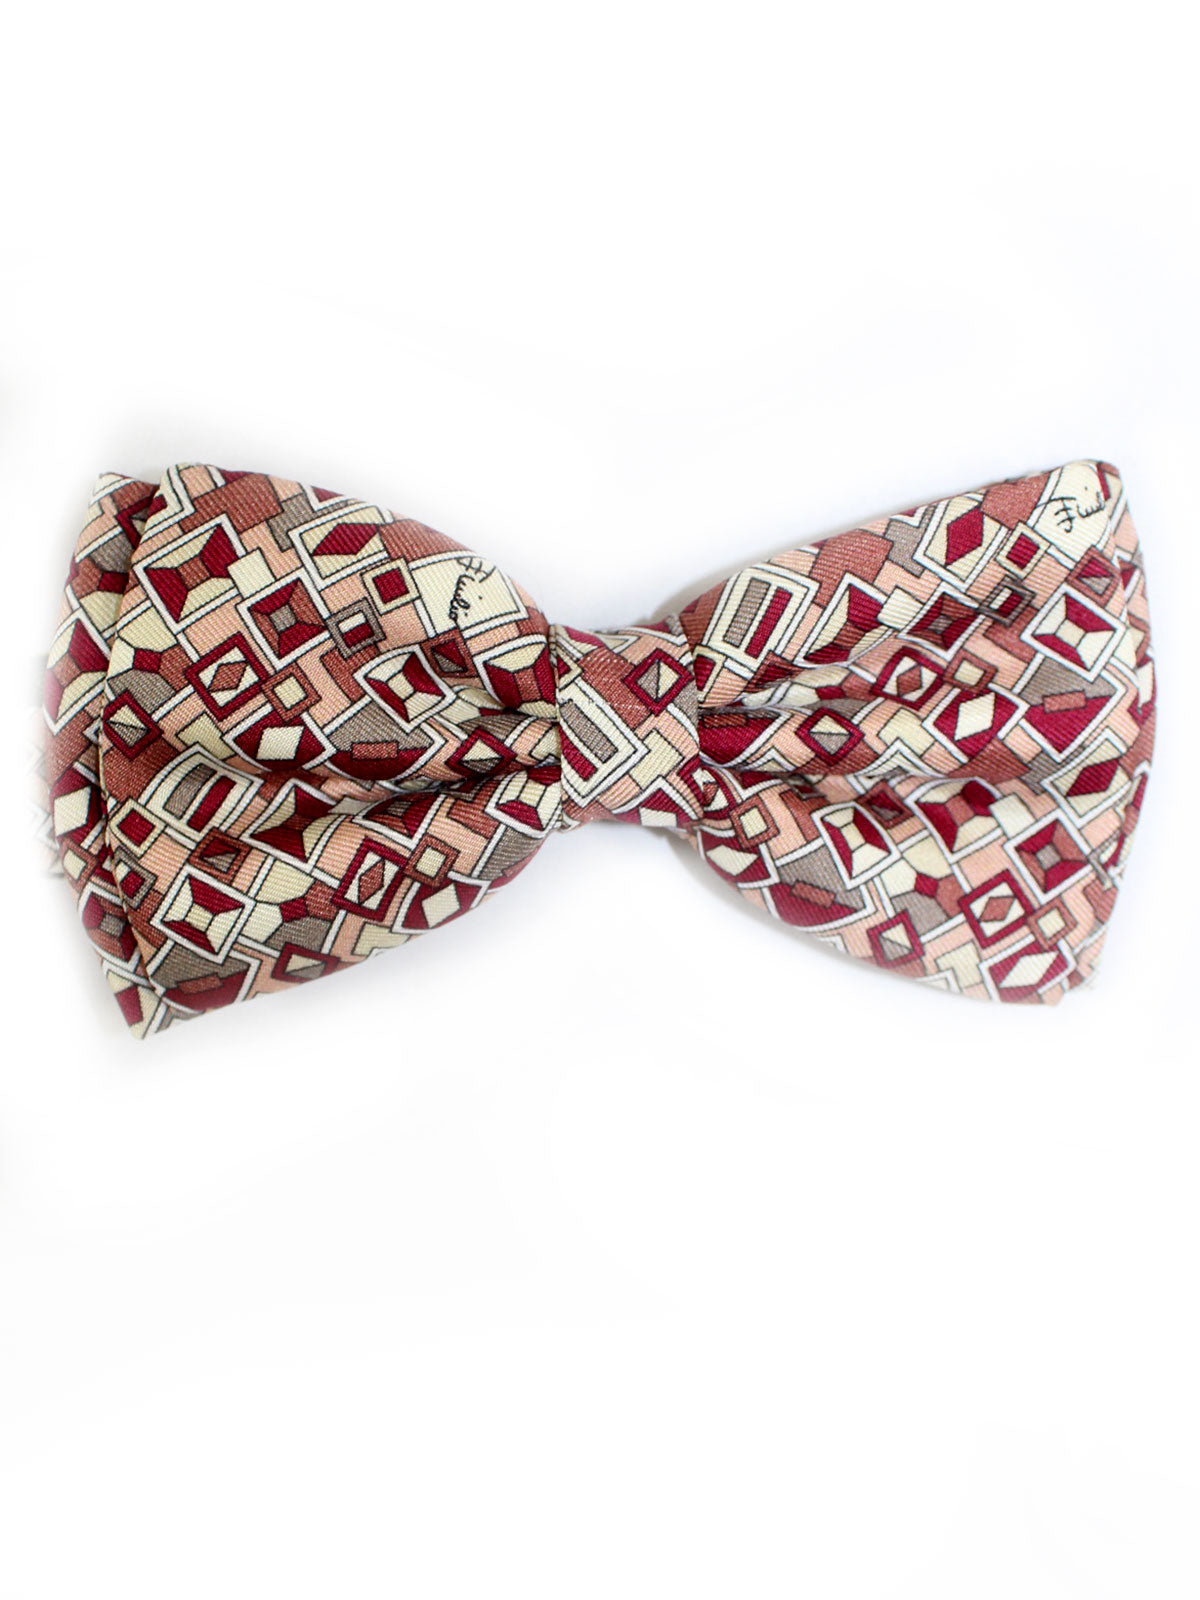 New Pucci Silk Bow Tie Pink 